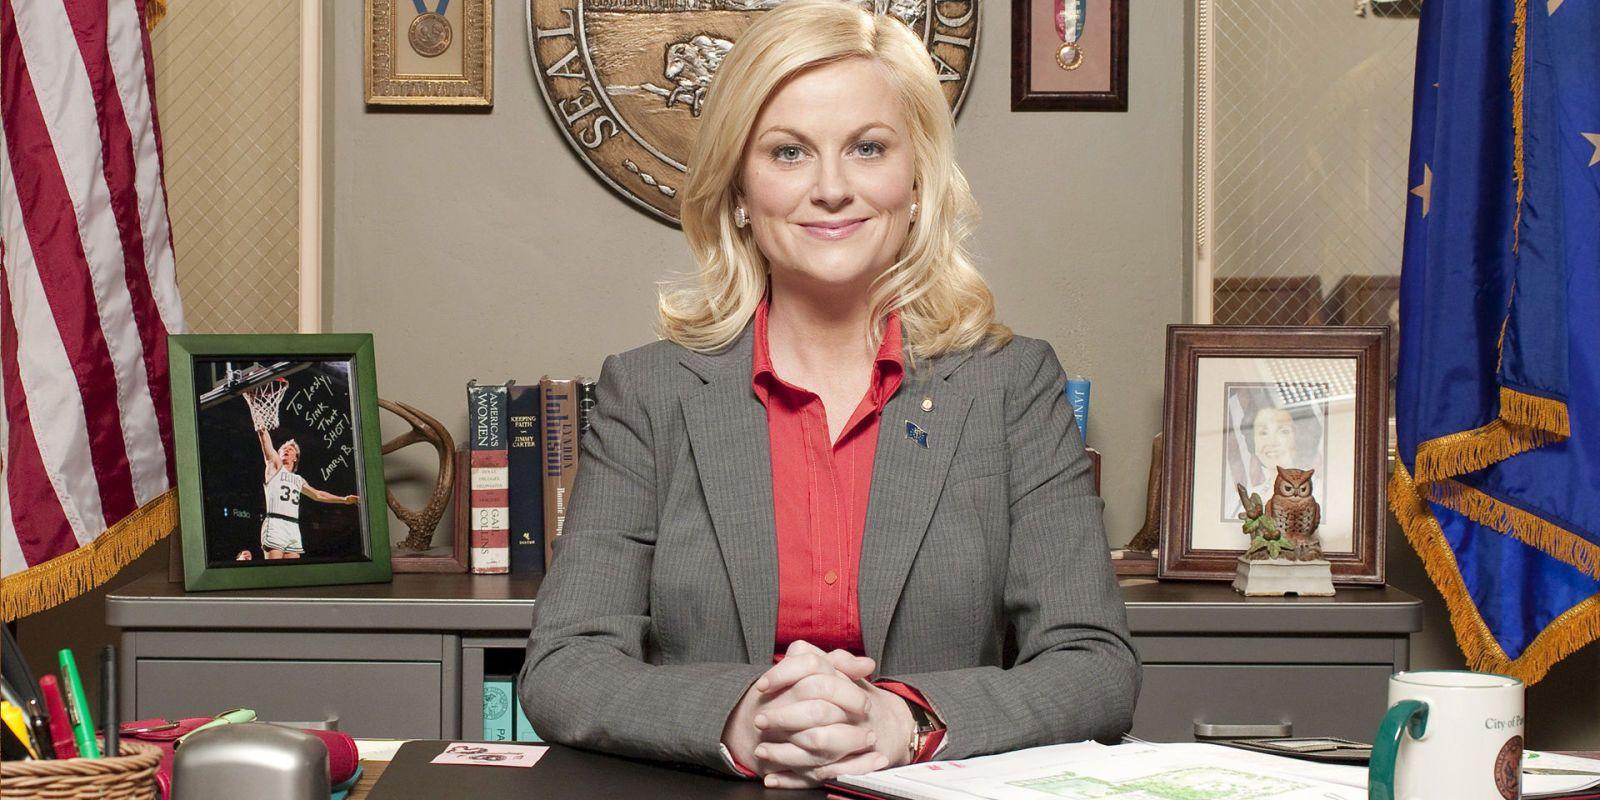 Parks and Recreation's Leslie Knope is back to comfort you